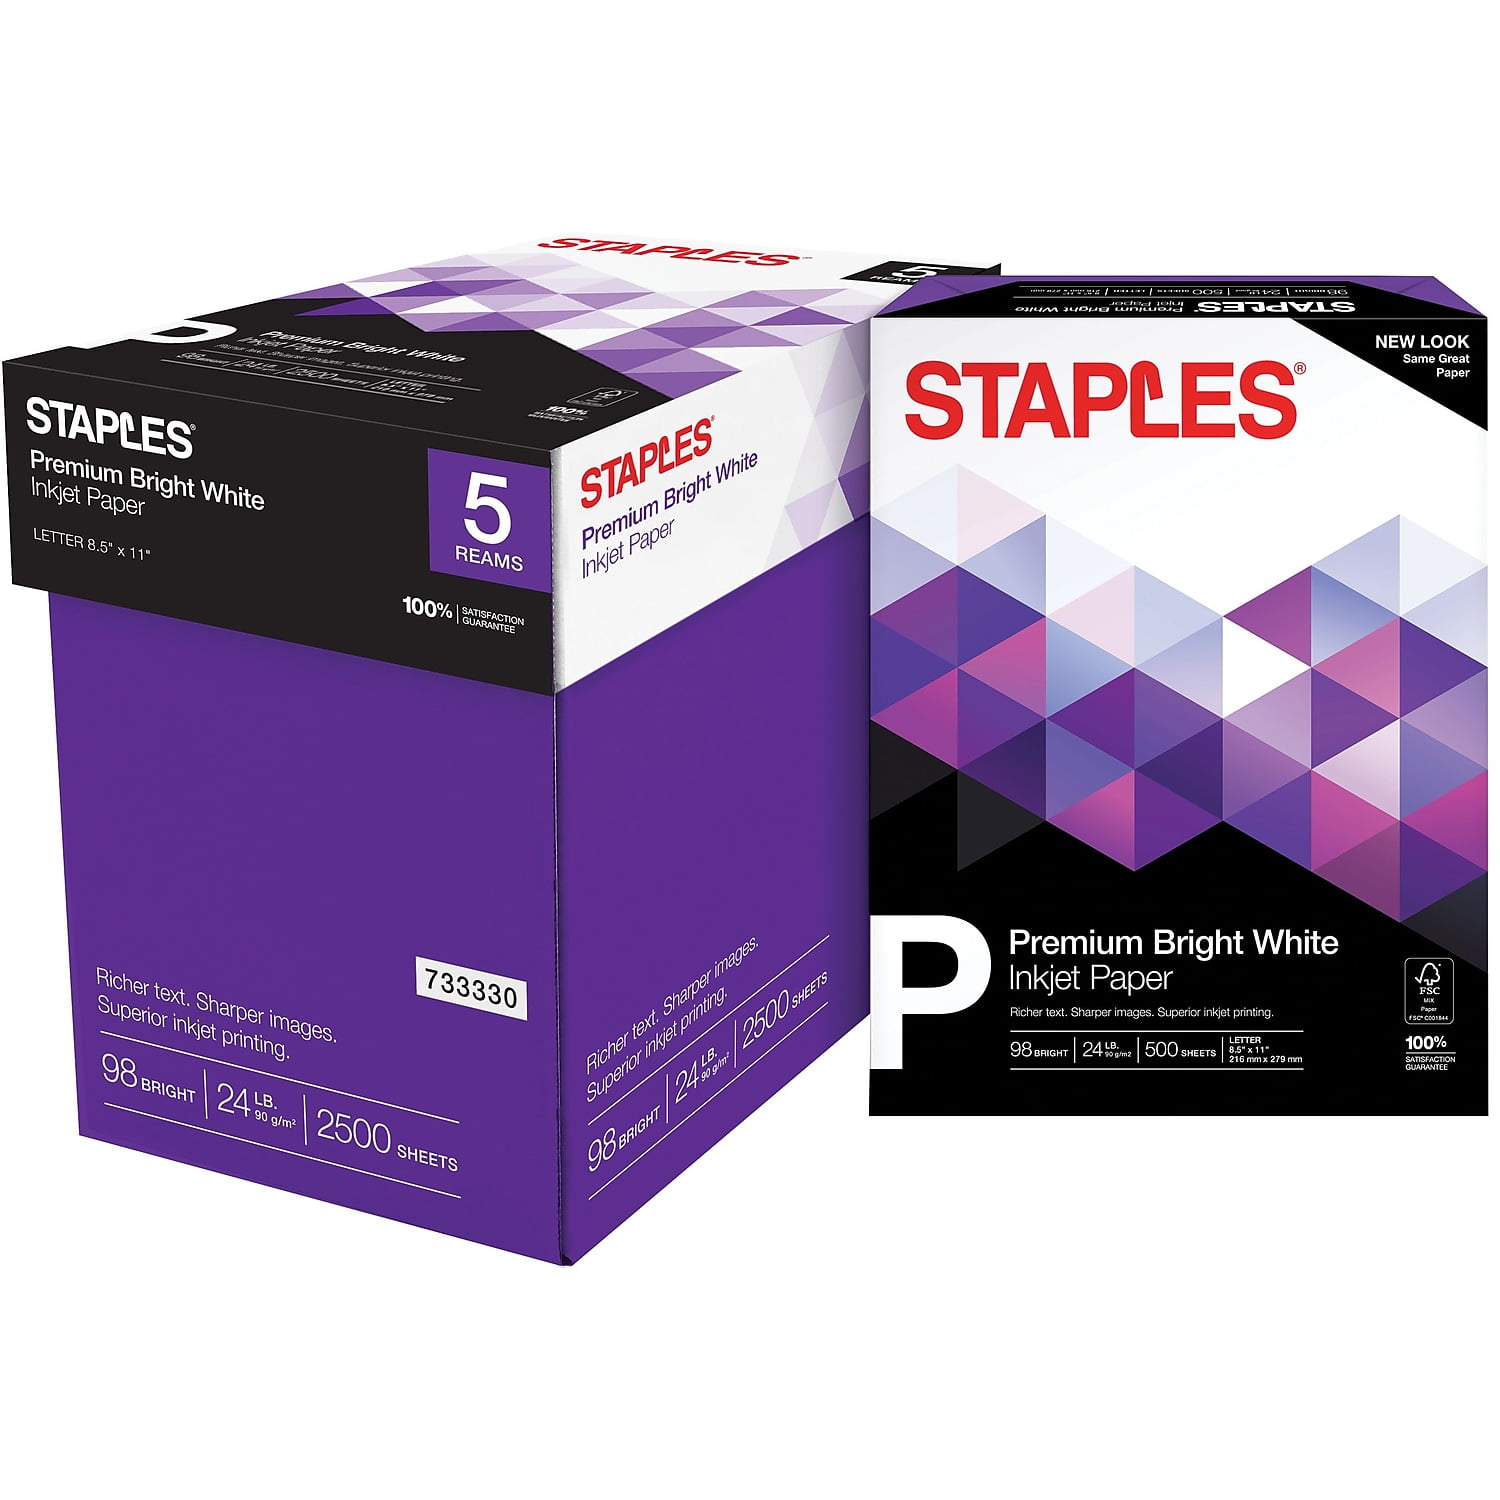 Staples 9.5 inch x 5.5 inch Business Paper 15 lbs 100 Brightness 3200/ct St177170/177170, White